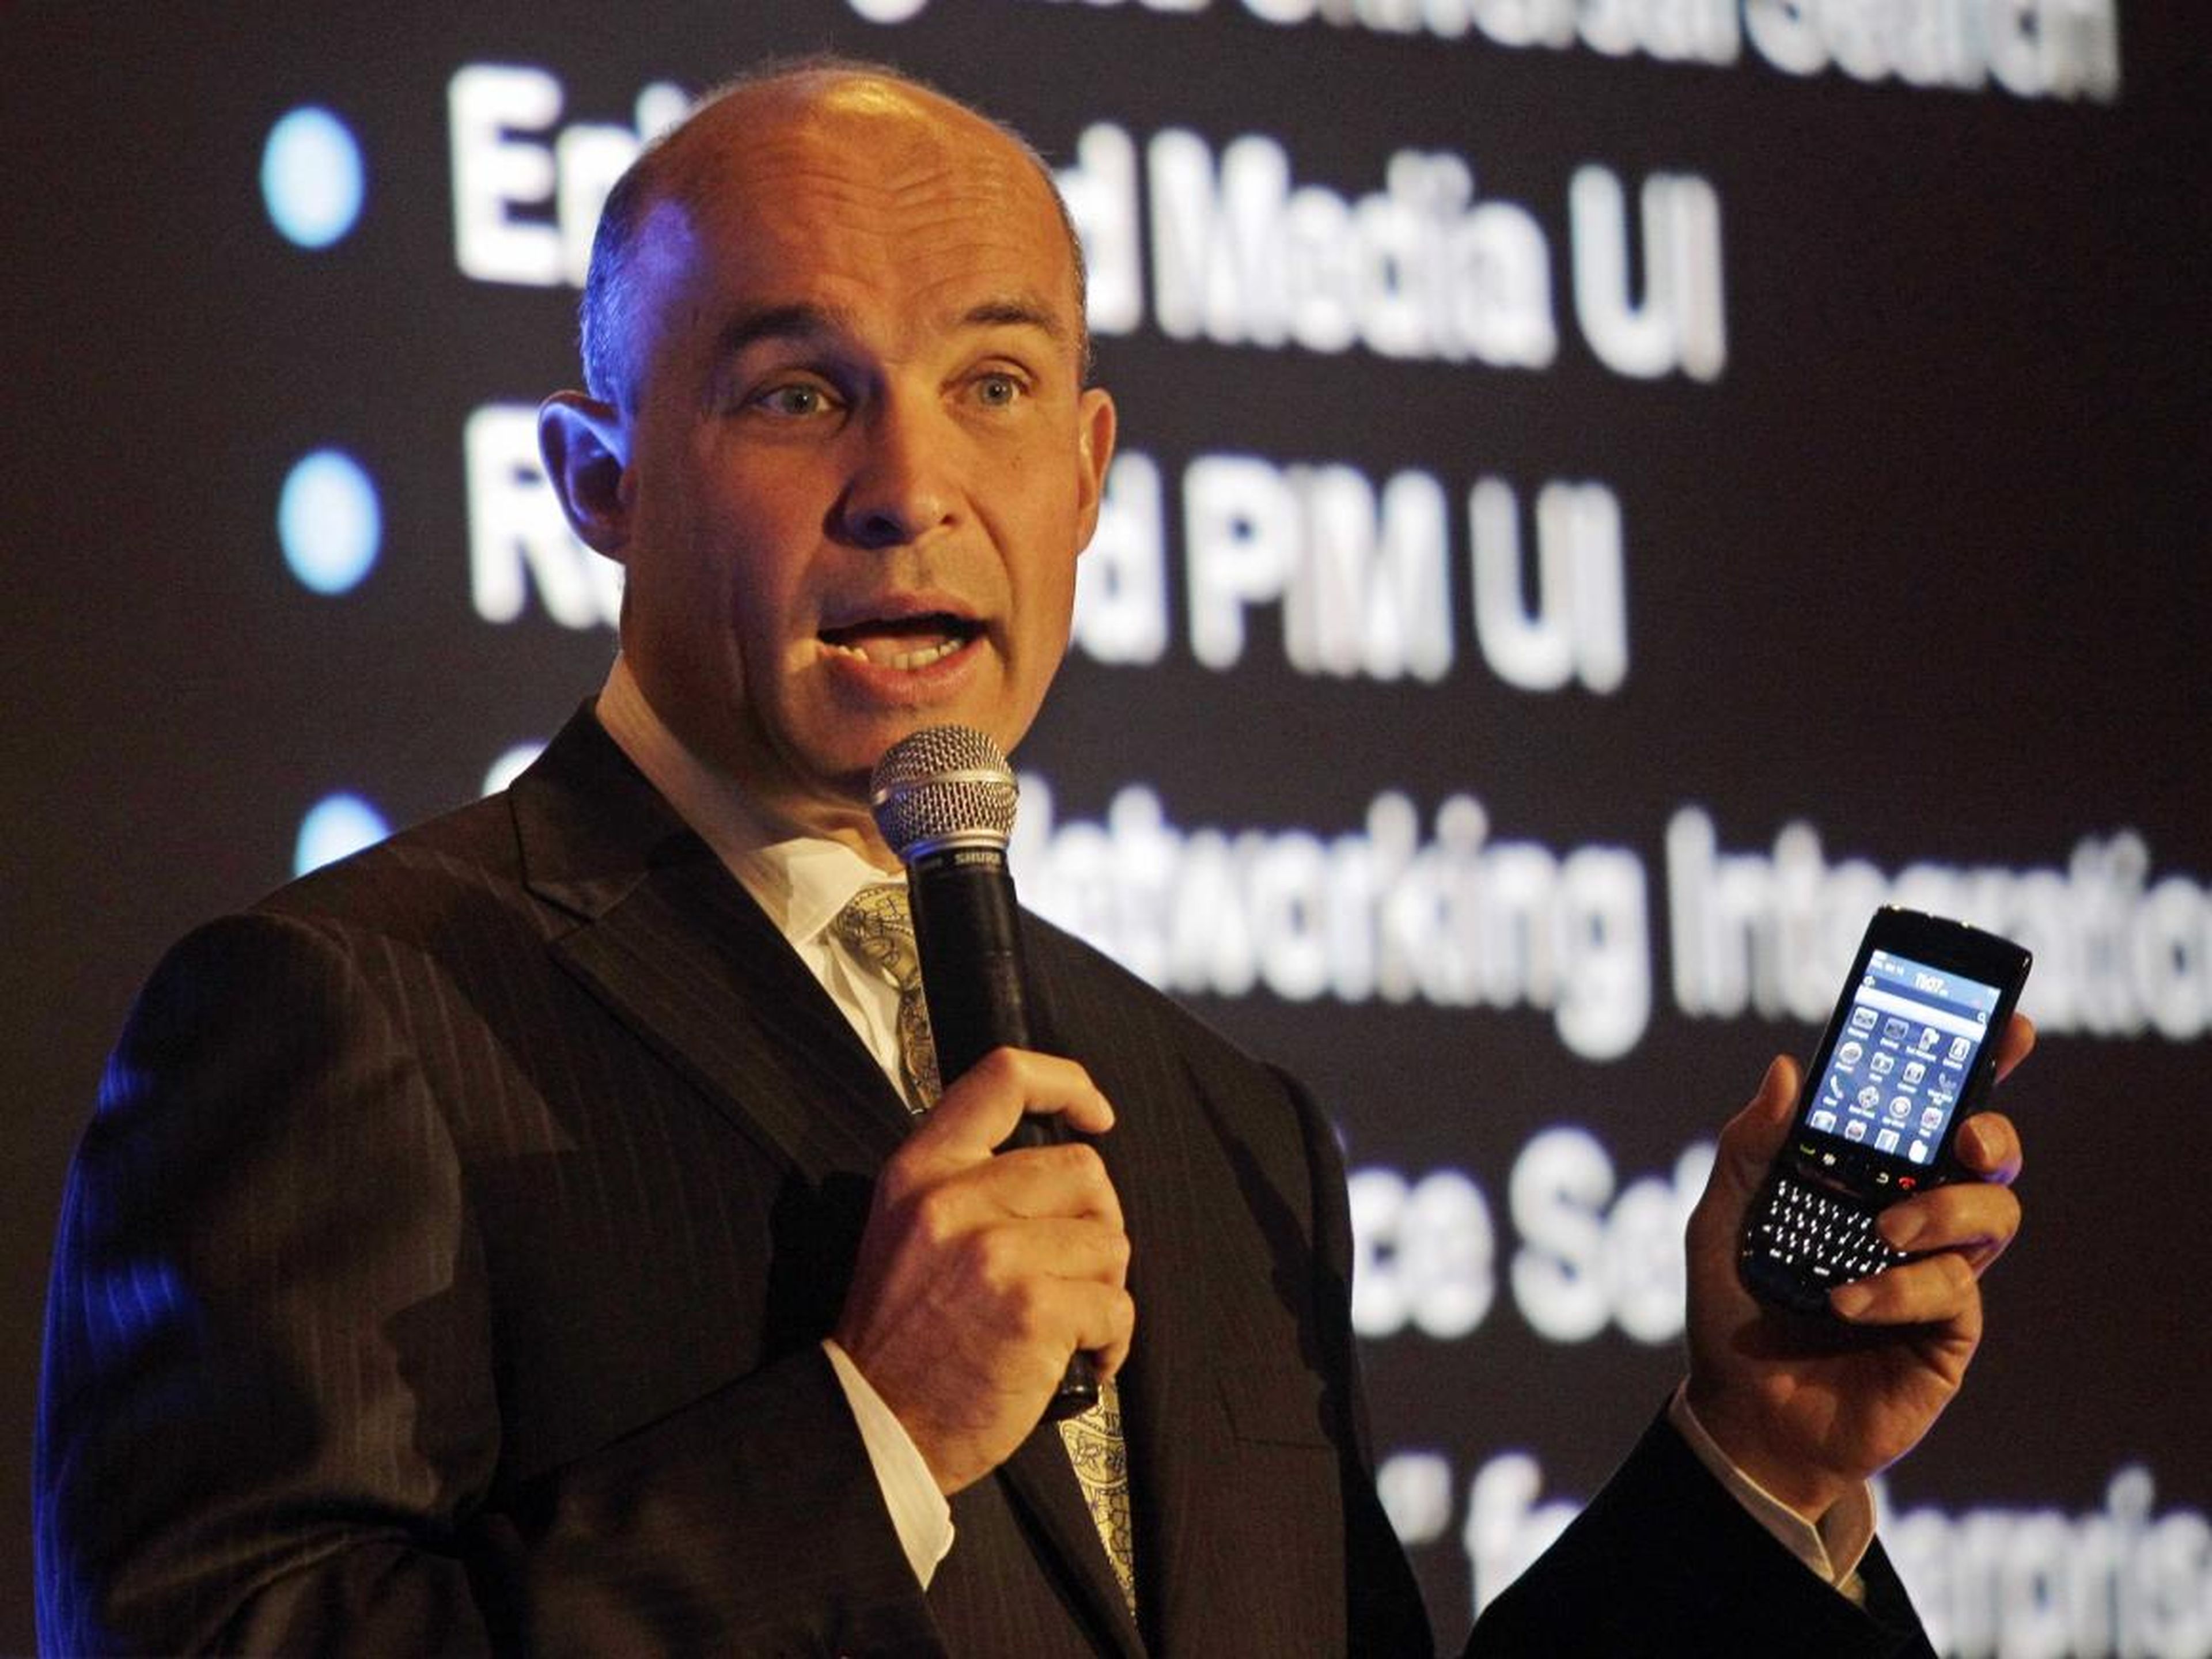 Jim Balsillie, then RIM's co-CEO: "It’s kind of one more entrant into an already very busy space with lots of choice for consumers. But in terms of a sort of a sea-change for BlackBerry, I would think that’s overstating it."